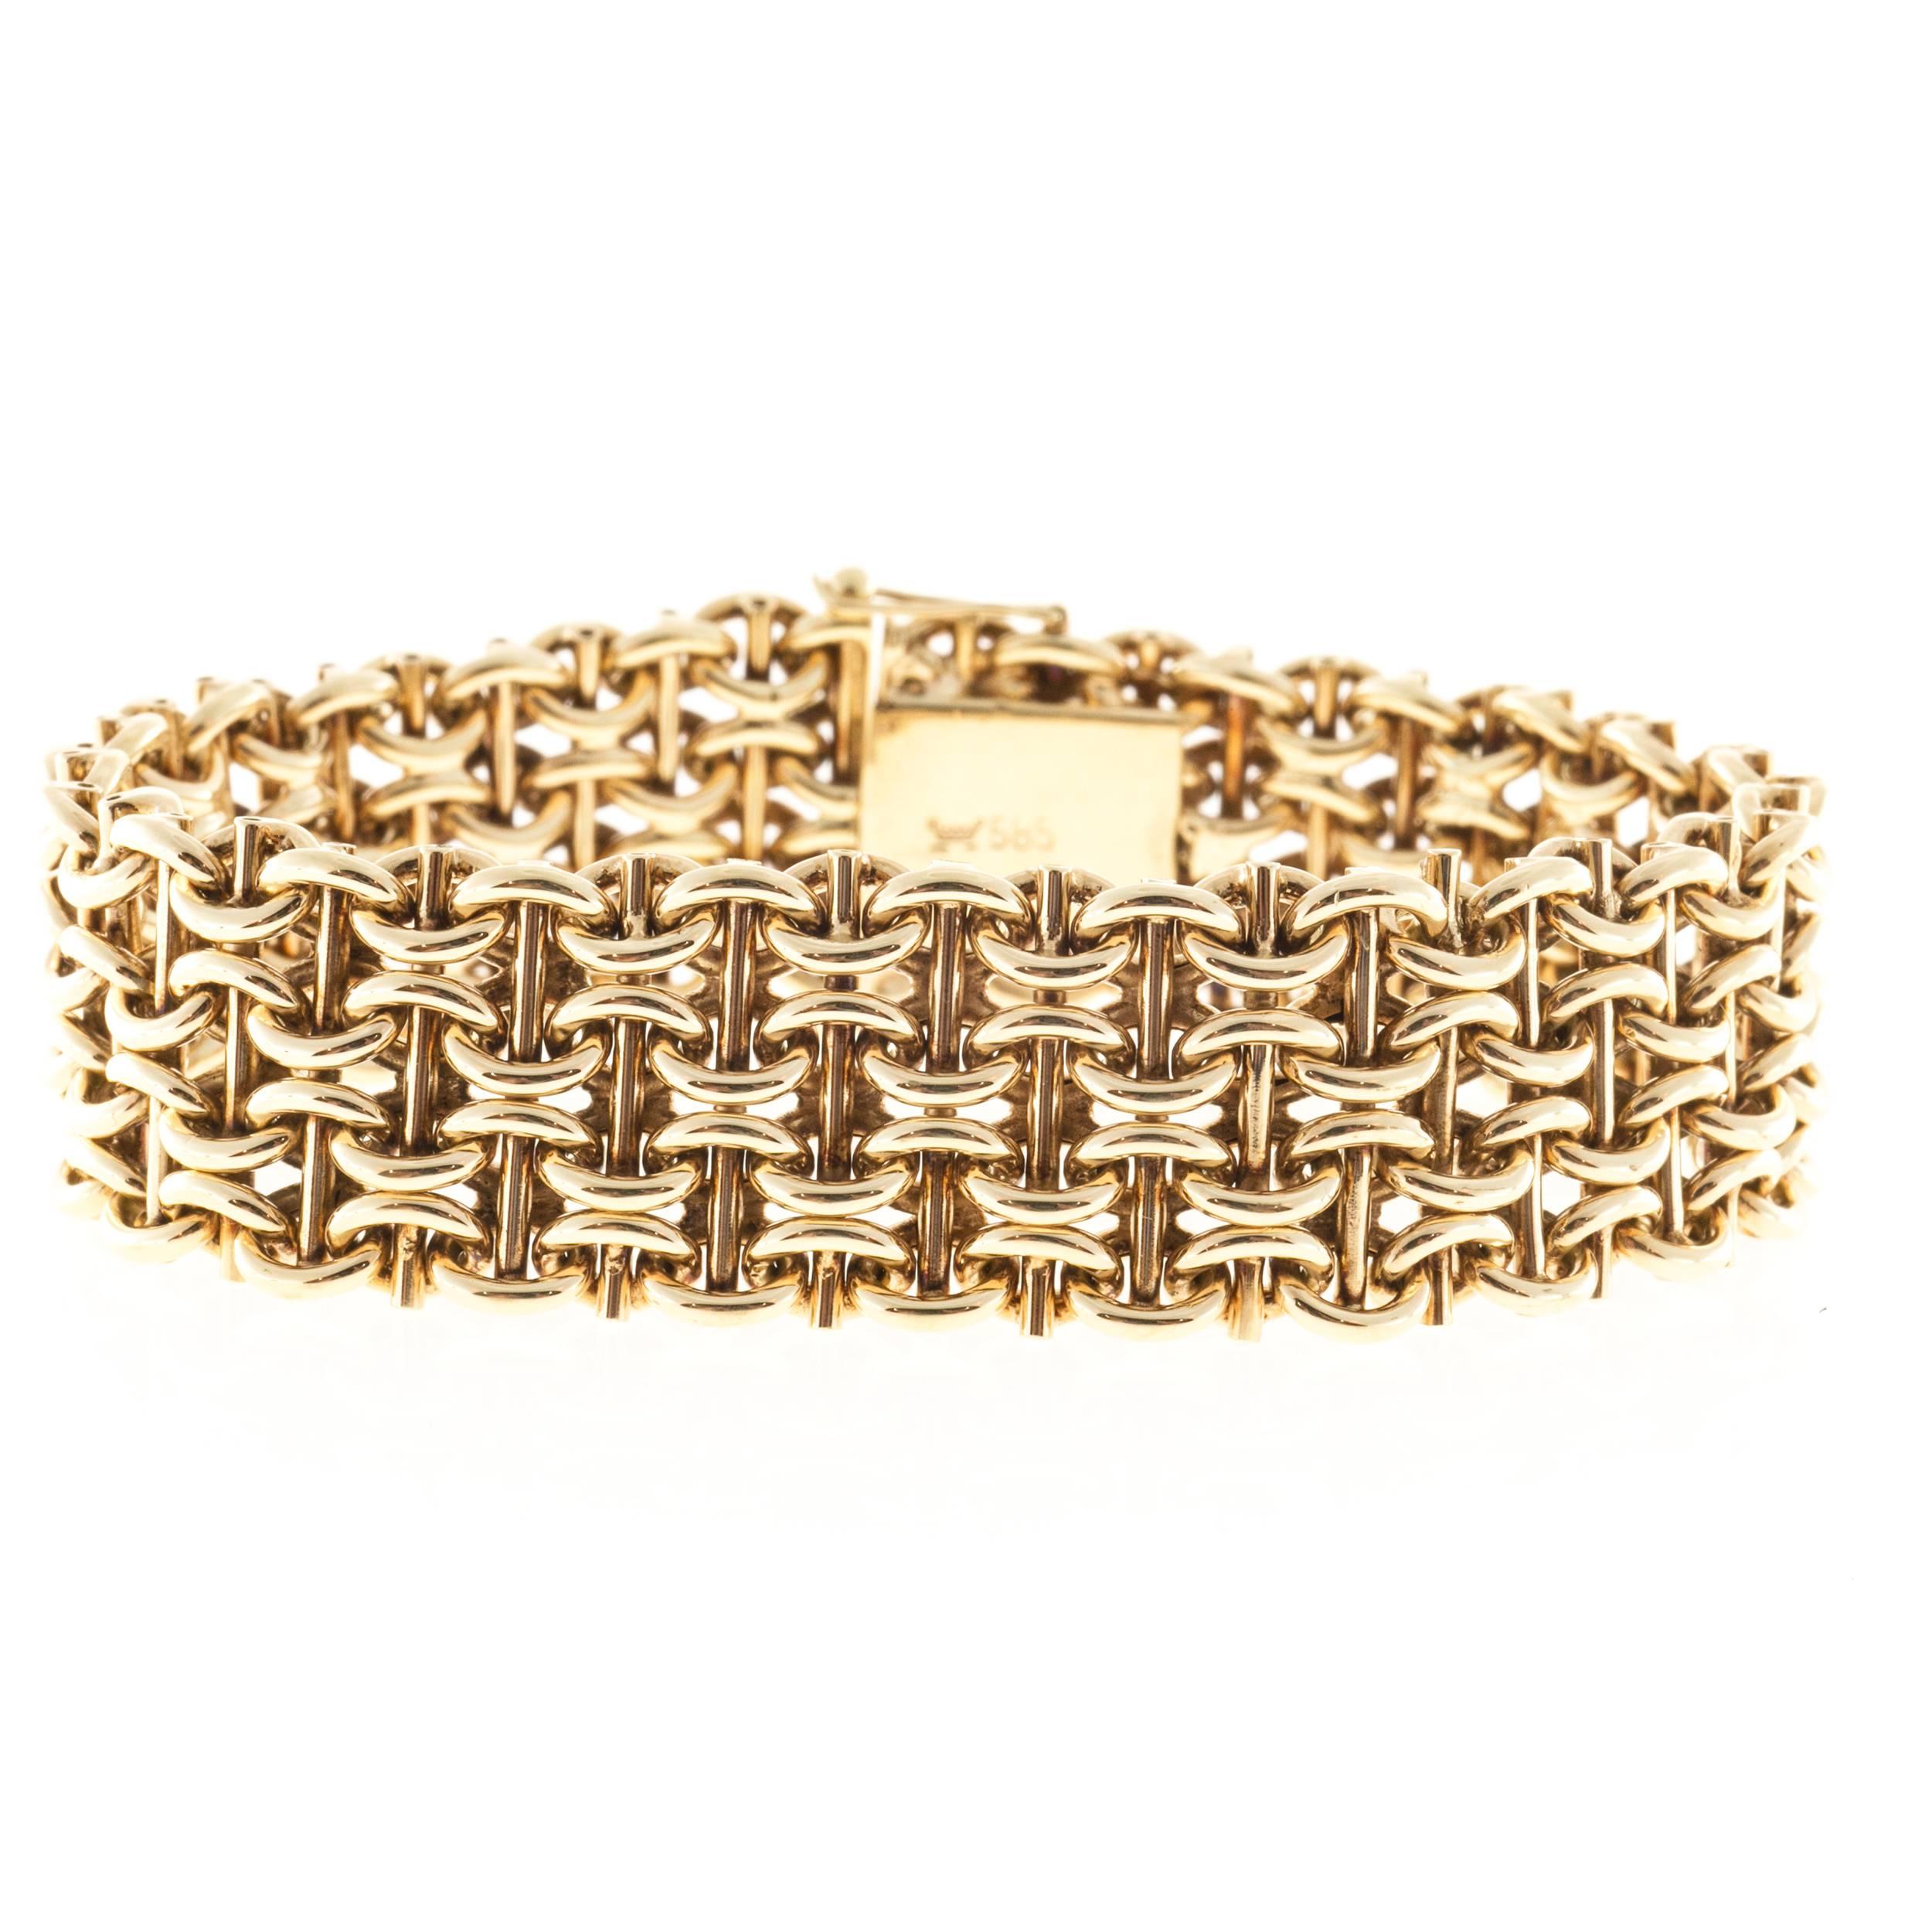 Handmade 1940's 14k yellow gold mesh bracelet. Lies flat with a hidden catch and double side safety. 

Length:  7 1/2 inches
14k Yellow Gold
Stamped:  585
Width:  18.06mm or .71 inch
Depth:  5.2mm
43.1 grams